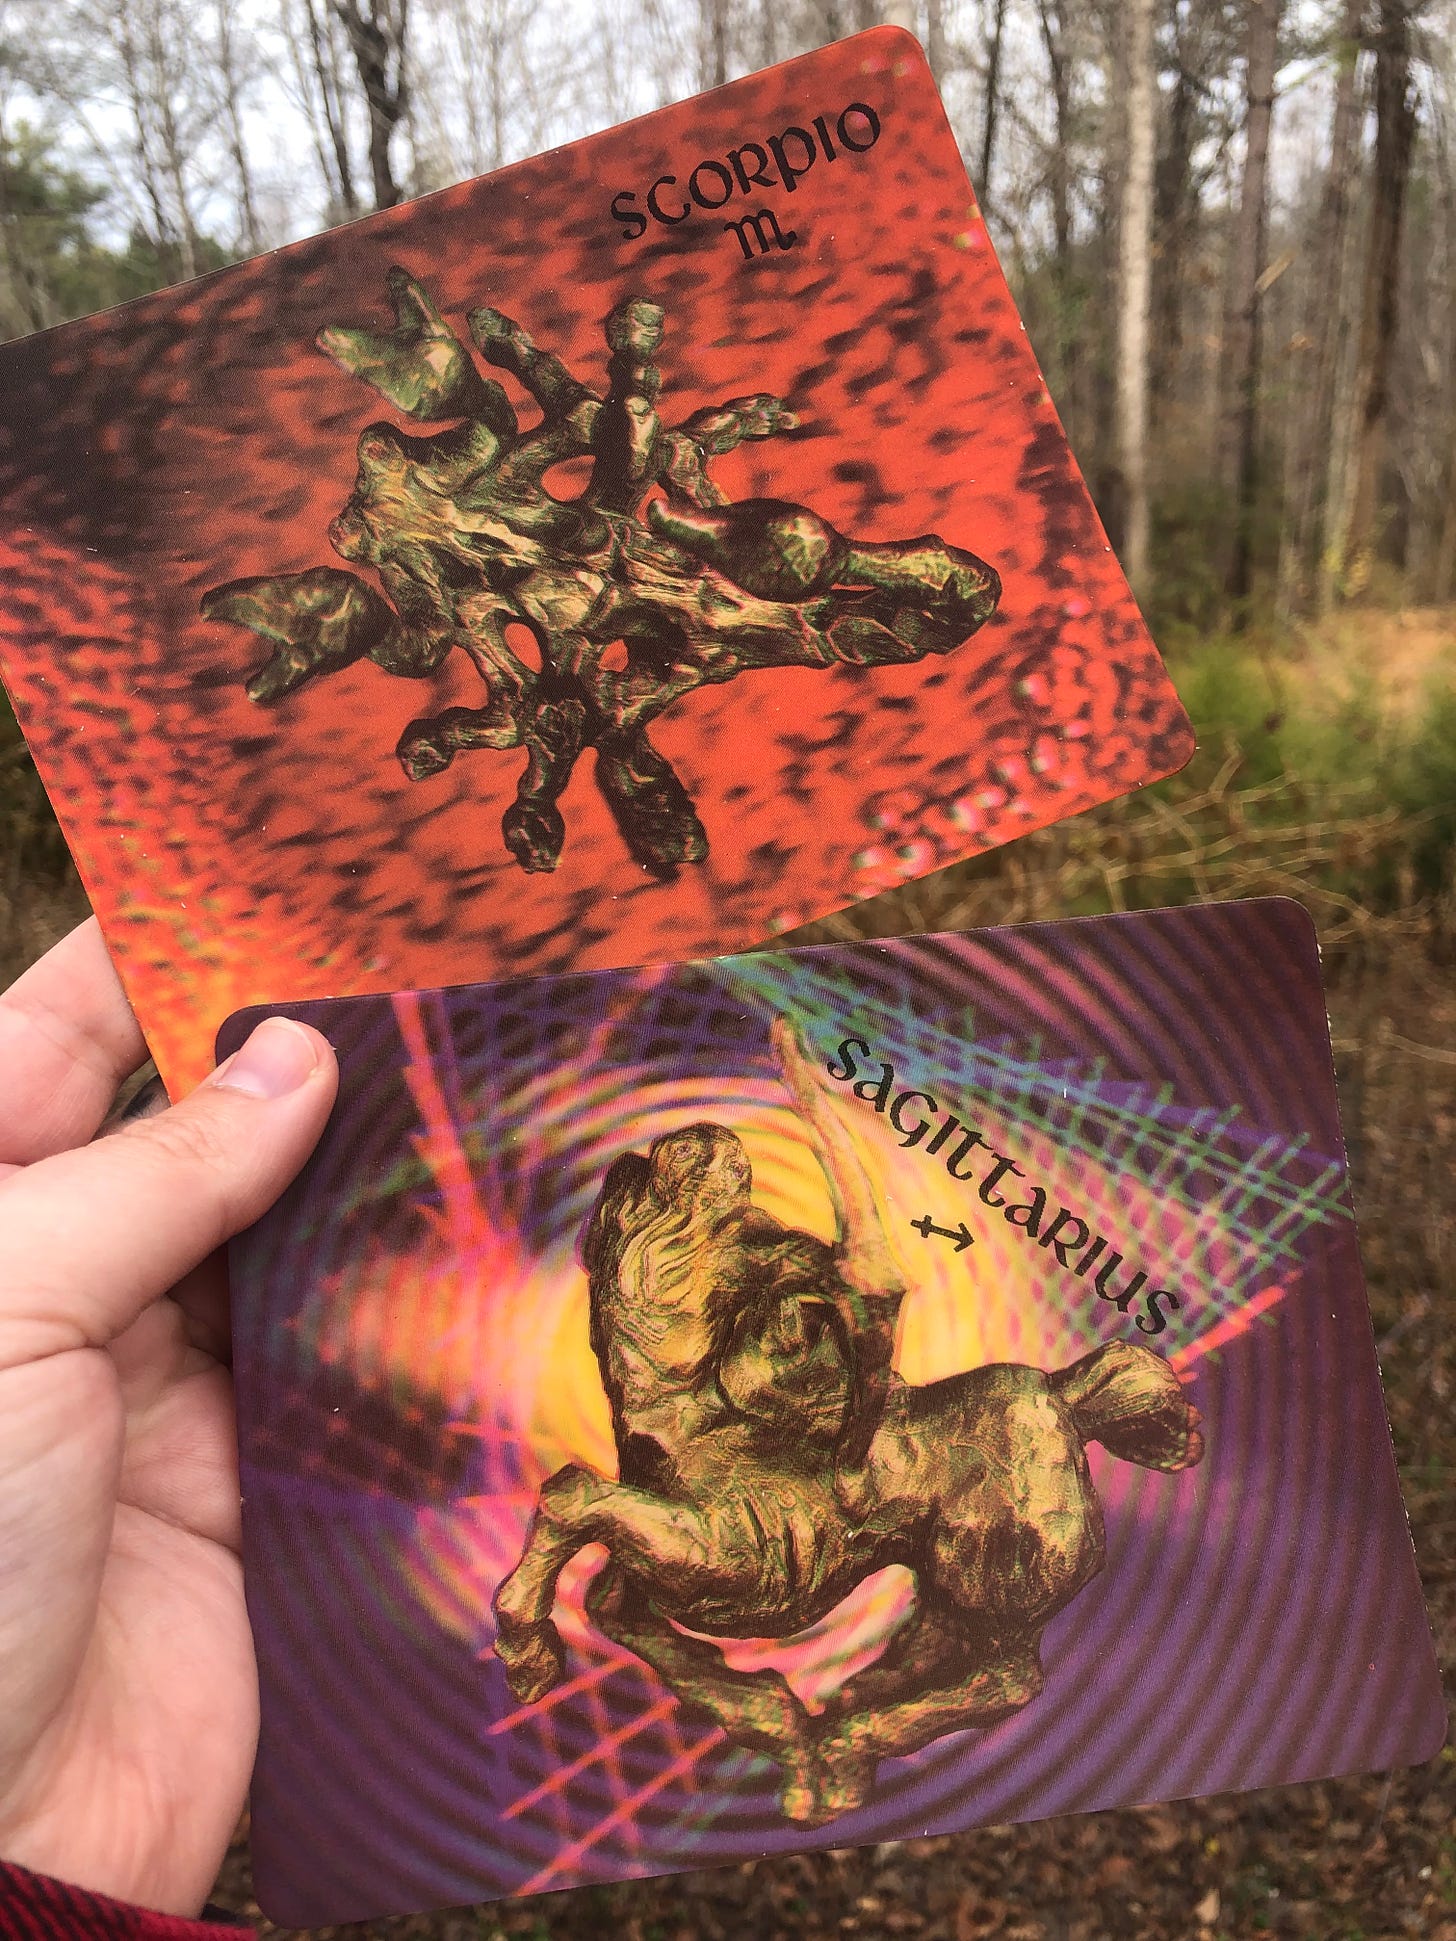 a white hand holds two holographic postcards up against the woods outside in autumn. the top postcard is red with a gold metallic scorpion figure on it with the text “scorpio” and glyph for the zodiac sign of scorpio. the bottom postcard is a background of purple with black radial circles. there are grid like lines spiraling out from the center in pink blue and green. the center image is of a golden figure of the centaur archer which represents the sign sagittarius. text reads “sagittarius” with the glyph for the zodiac sign sagittarius. 